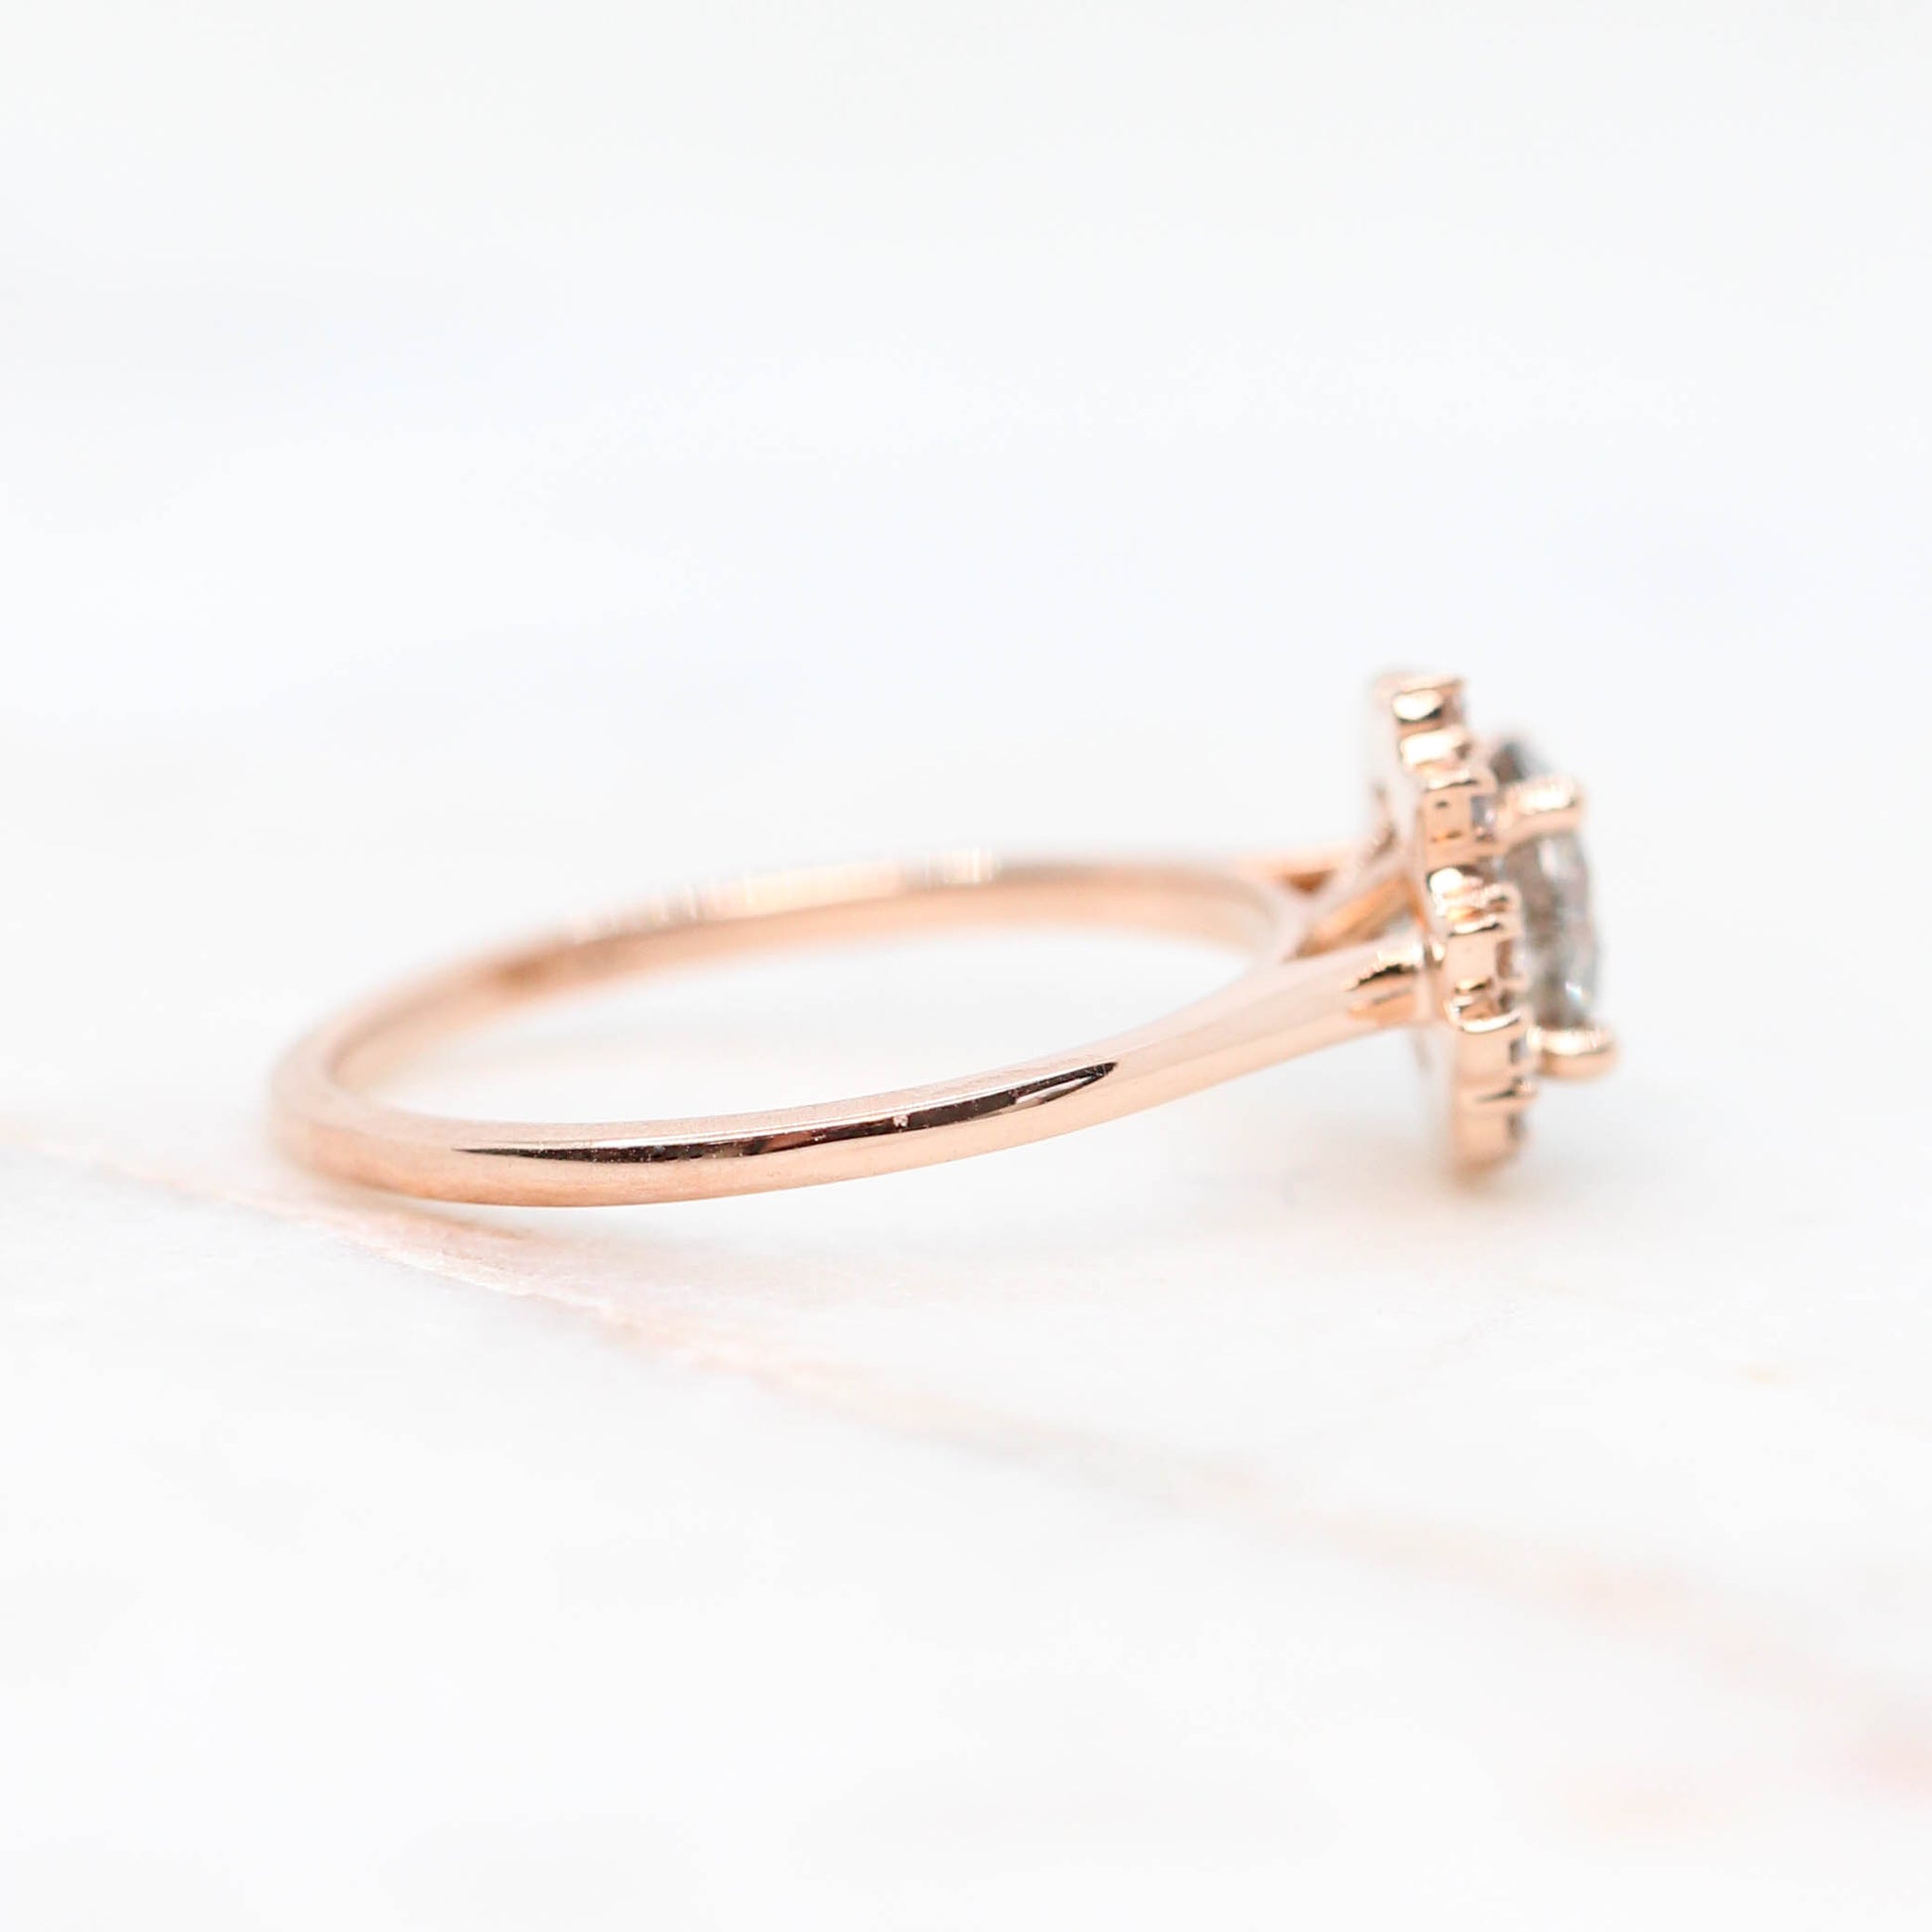 Alizeh Ring with a 0.94 Carat Round Gray Celestial Diamond and White Accent Diamonds in 14k Rose Gold - Ready to Size and Ship - Midwinter Co. Alternative Bridal Rings and Modern Fine Jewelry